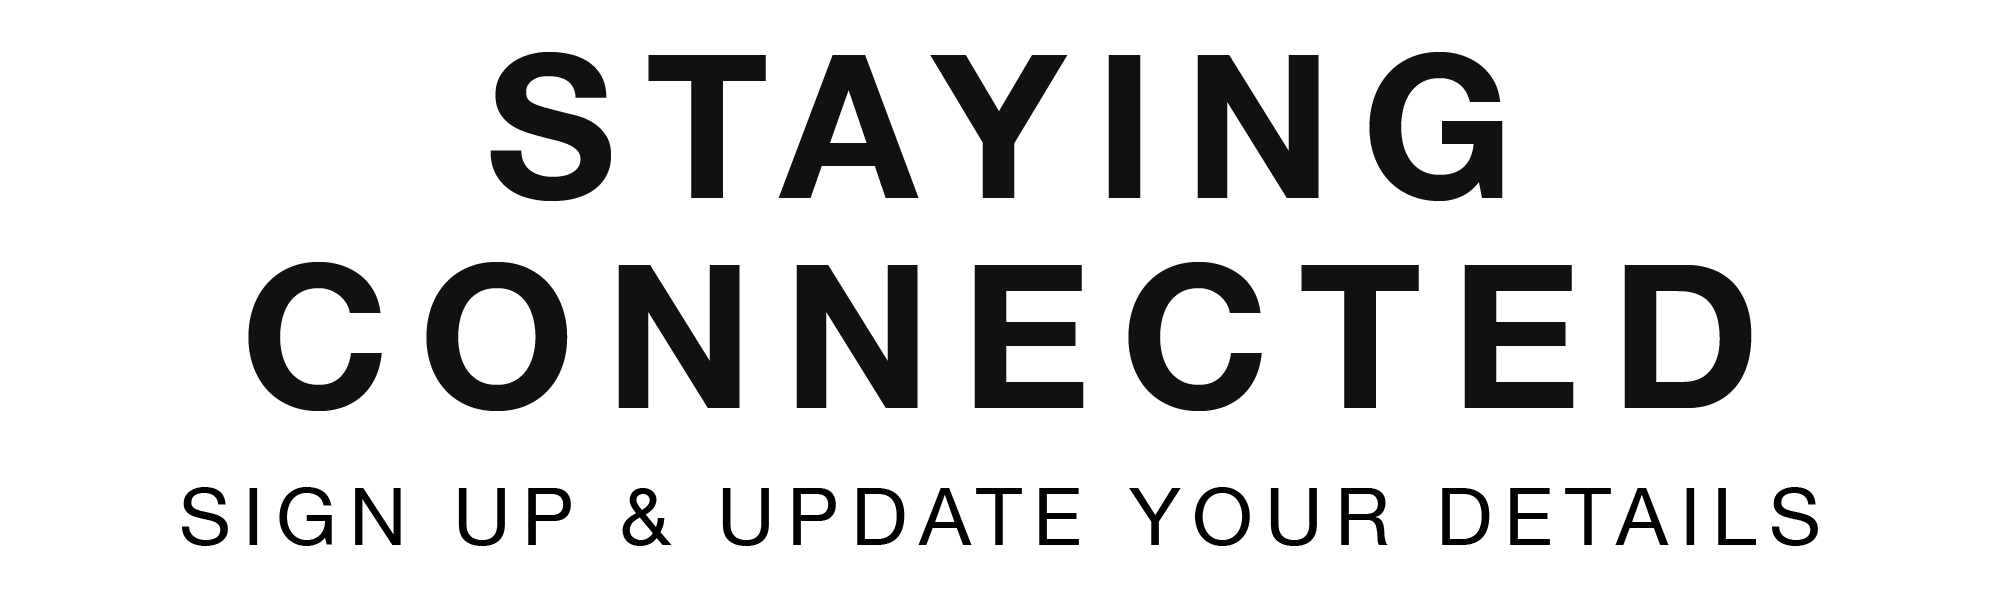 Stay Connected – to receive updates or update your details click here